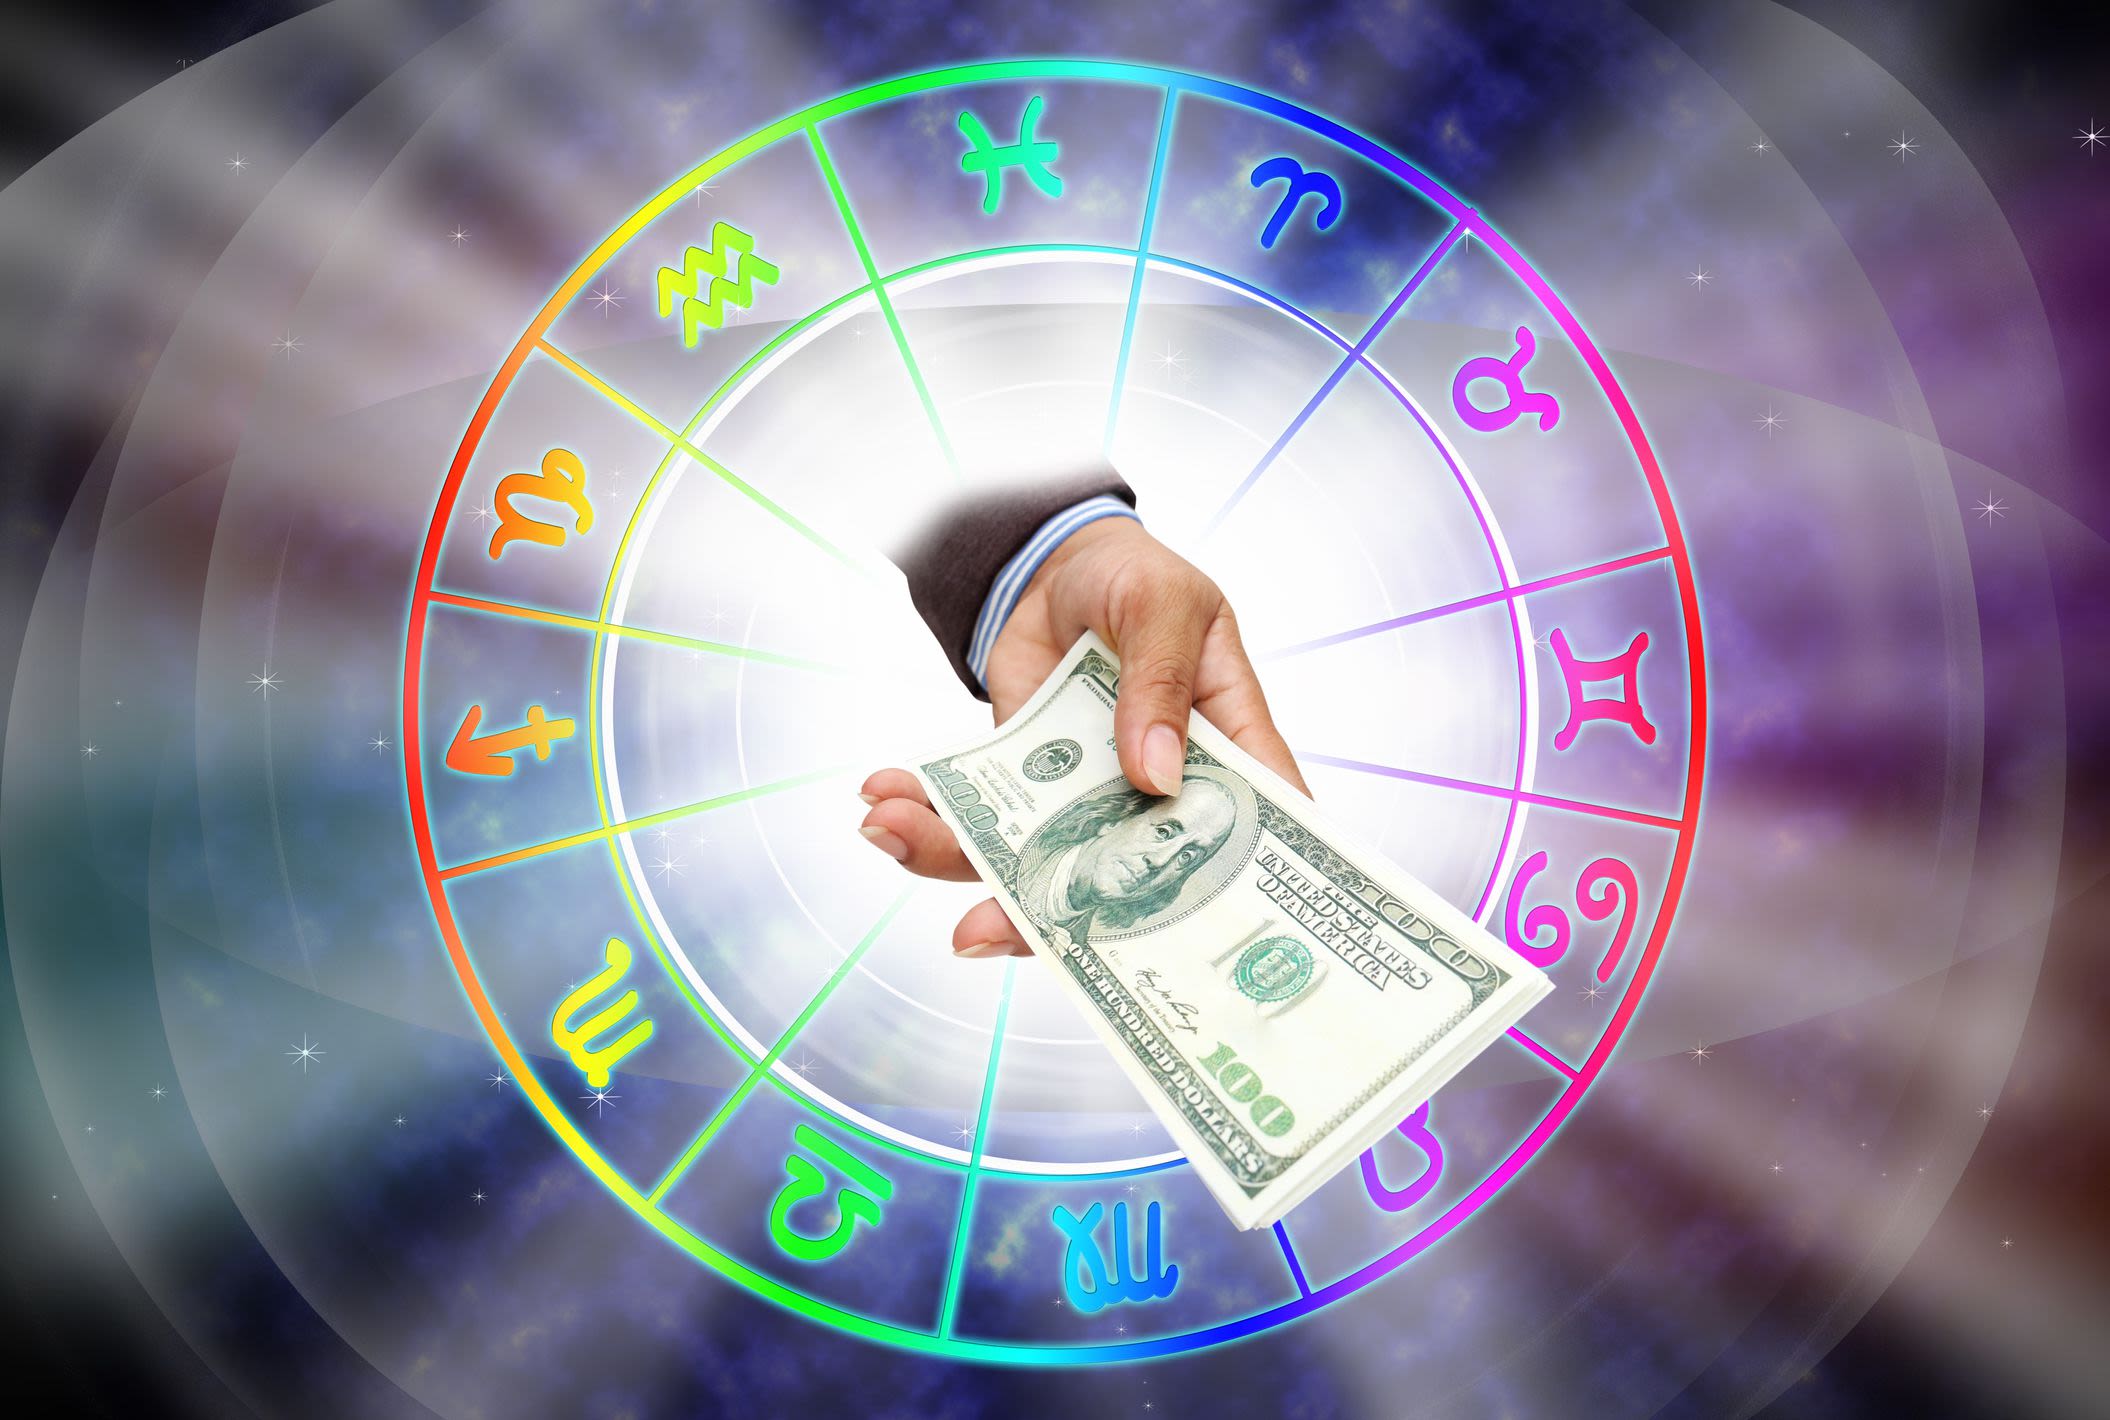 The Best Lucky Lottery Numbers Based On Your Zodiac Sign